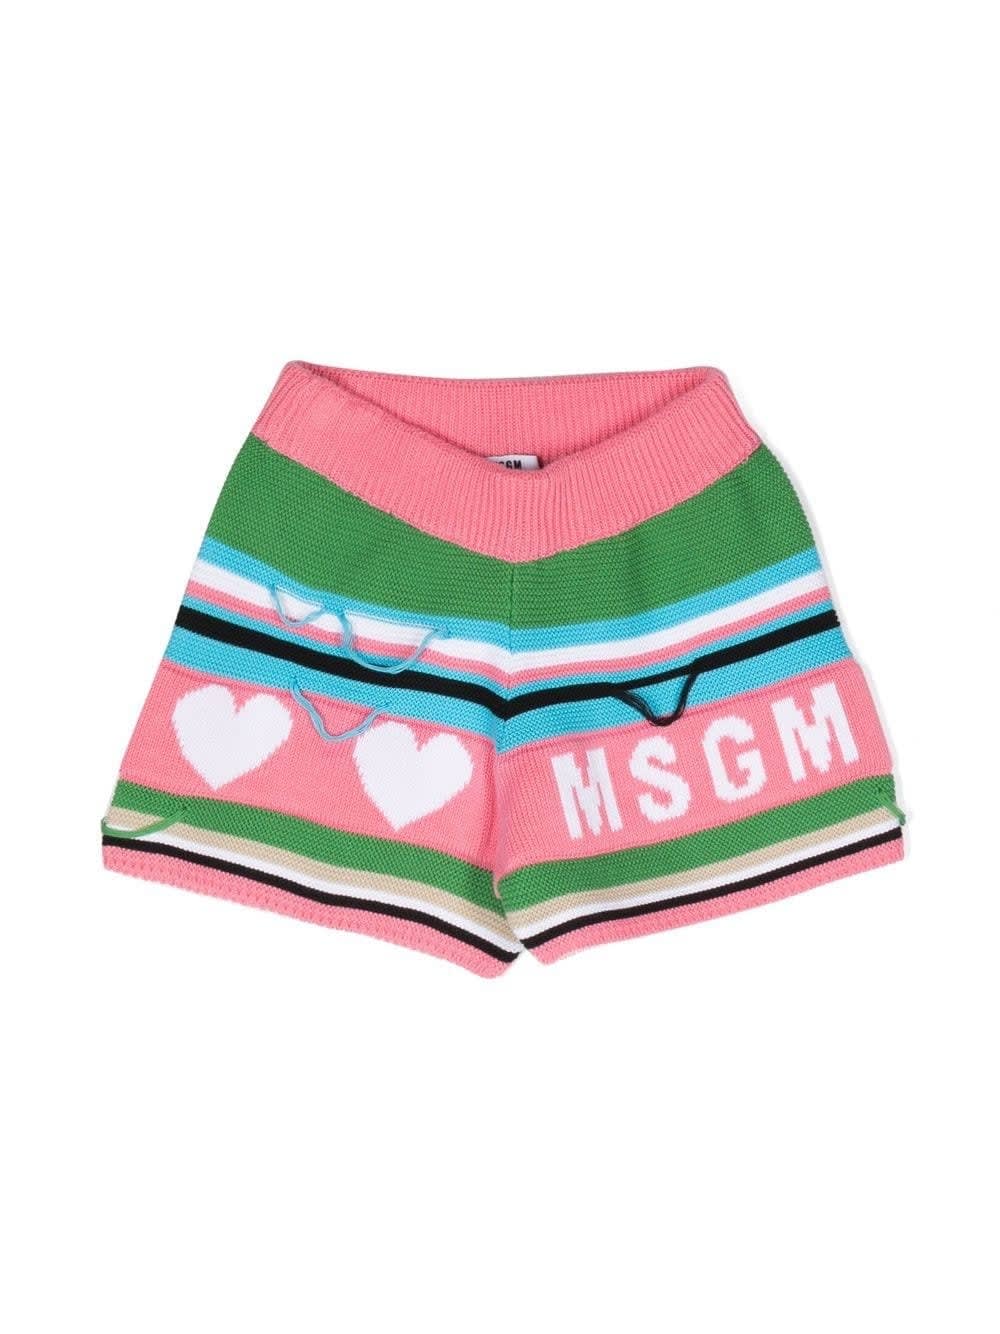 MSGM PINK SHORTS WITH LOGO AND MULTICOLOURED STRIPES